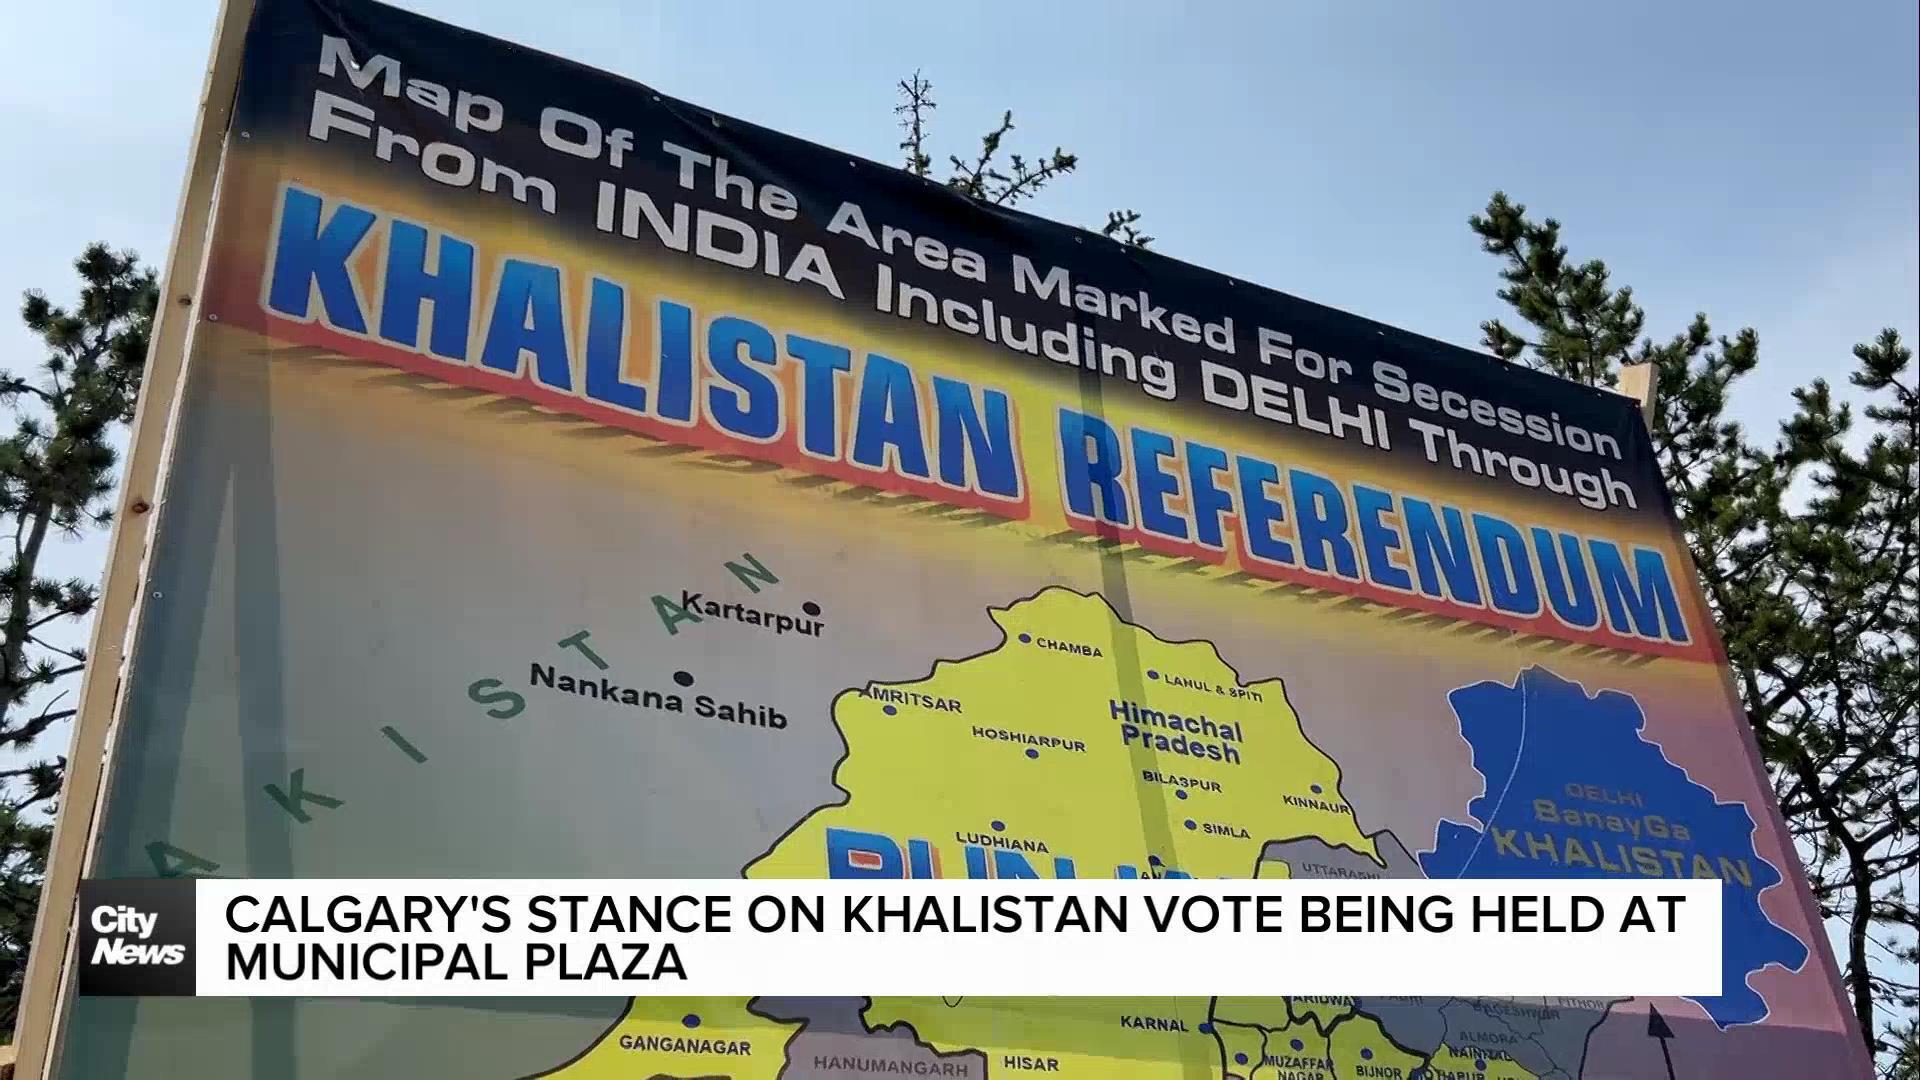 Calgary's stance on Khalistan vote being held at Municipal Plaza